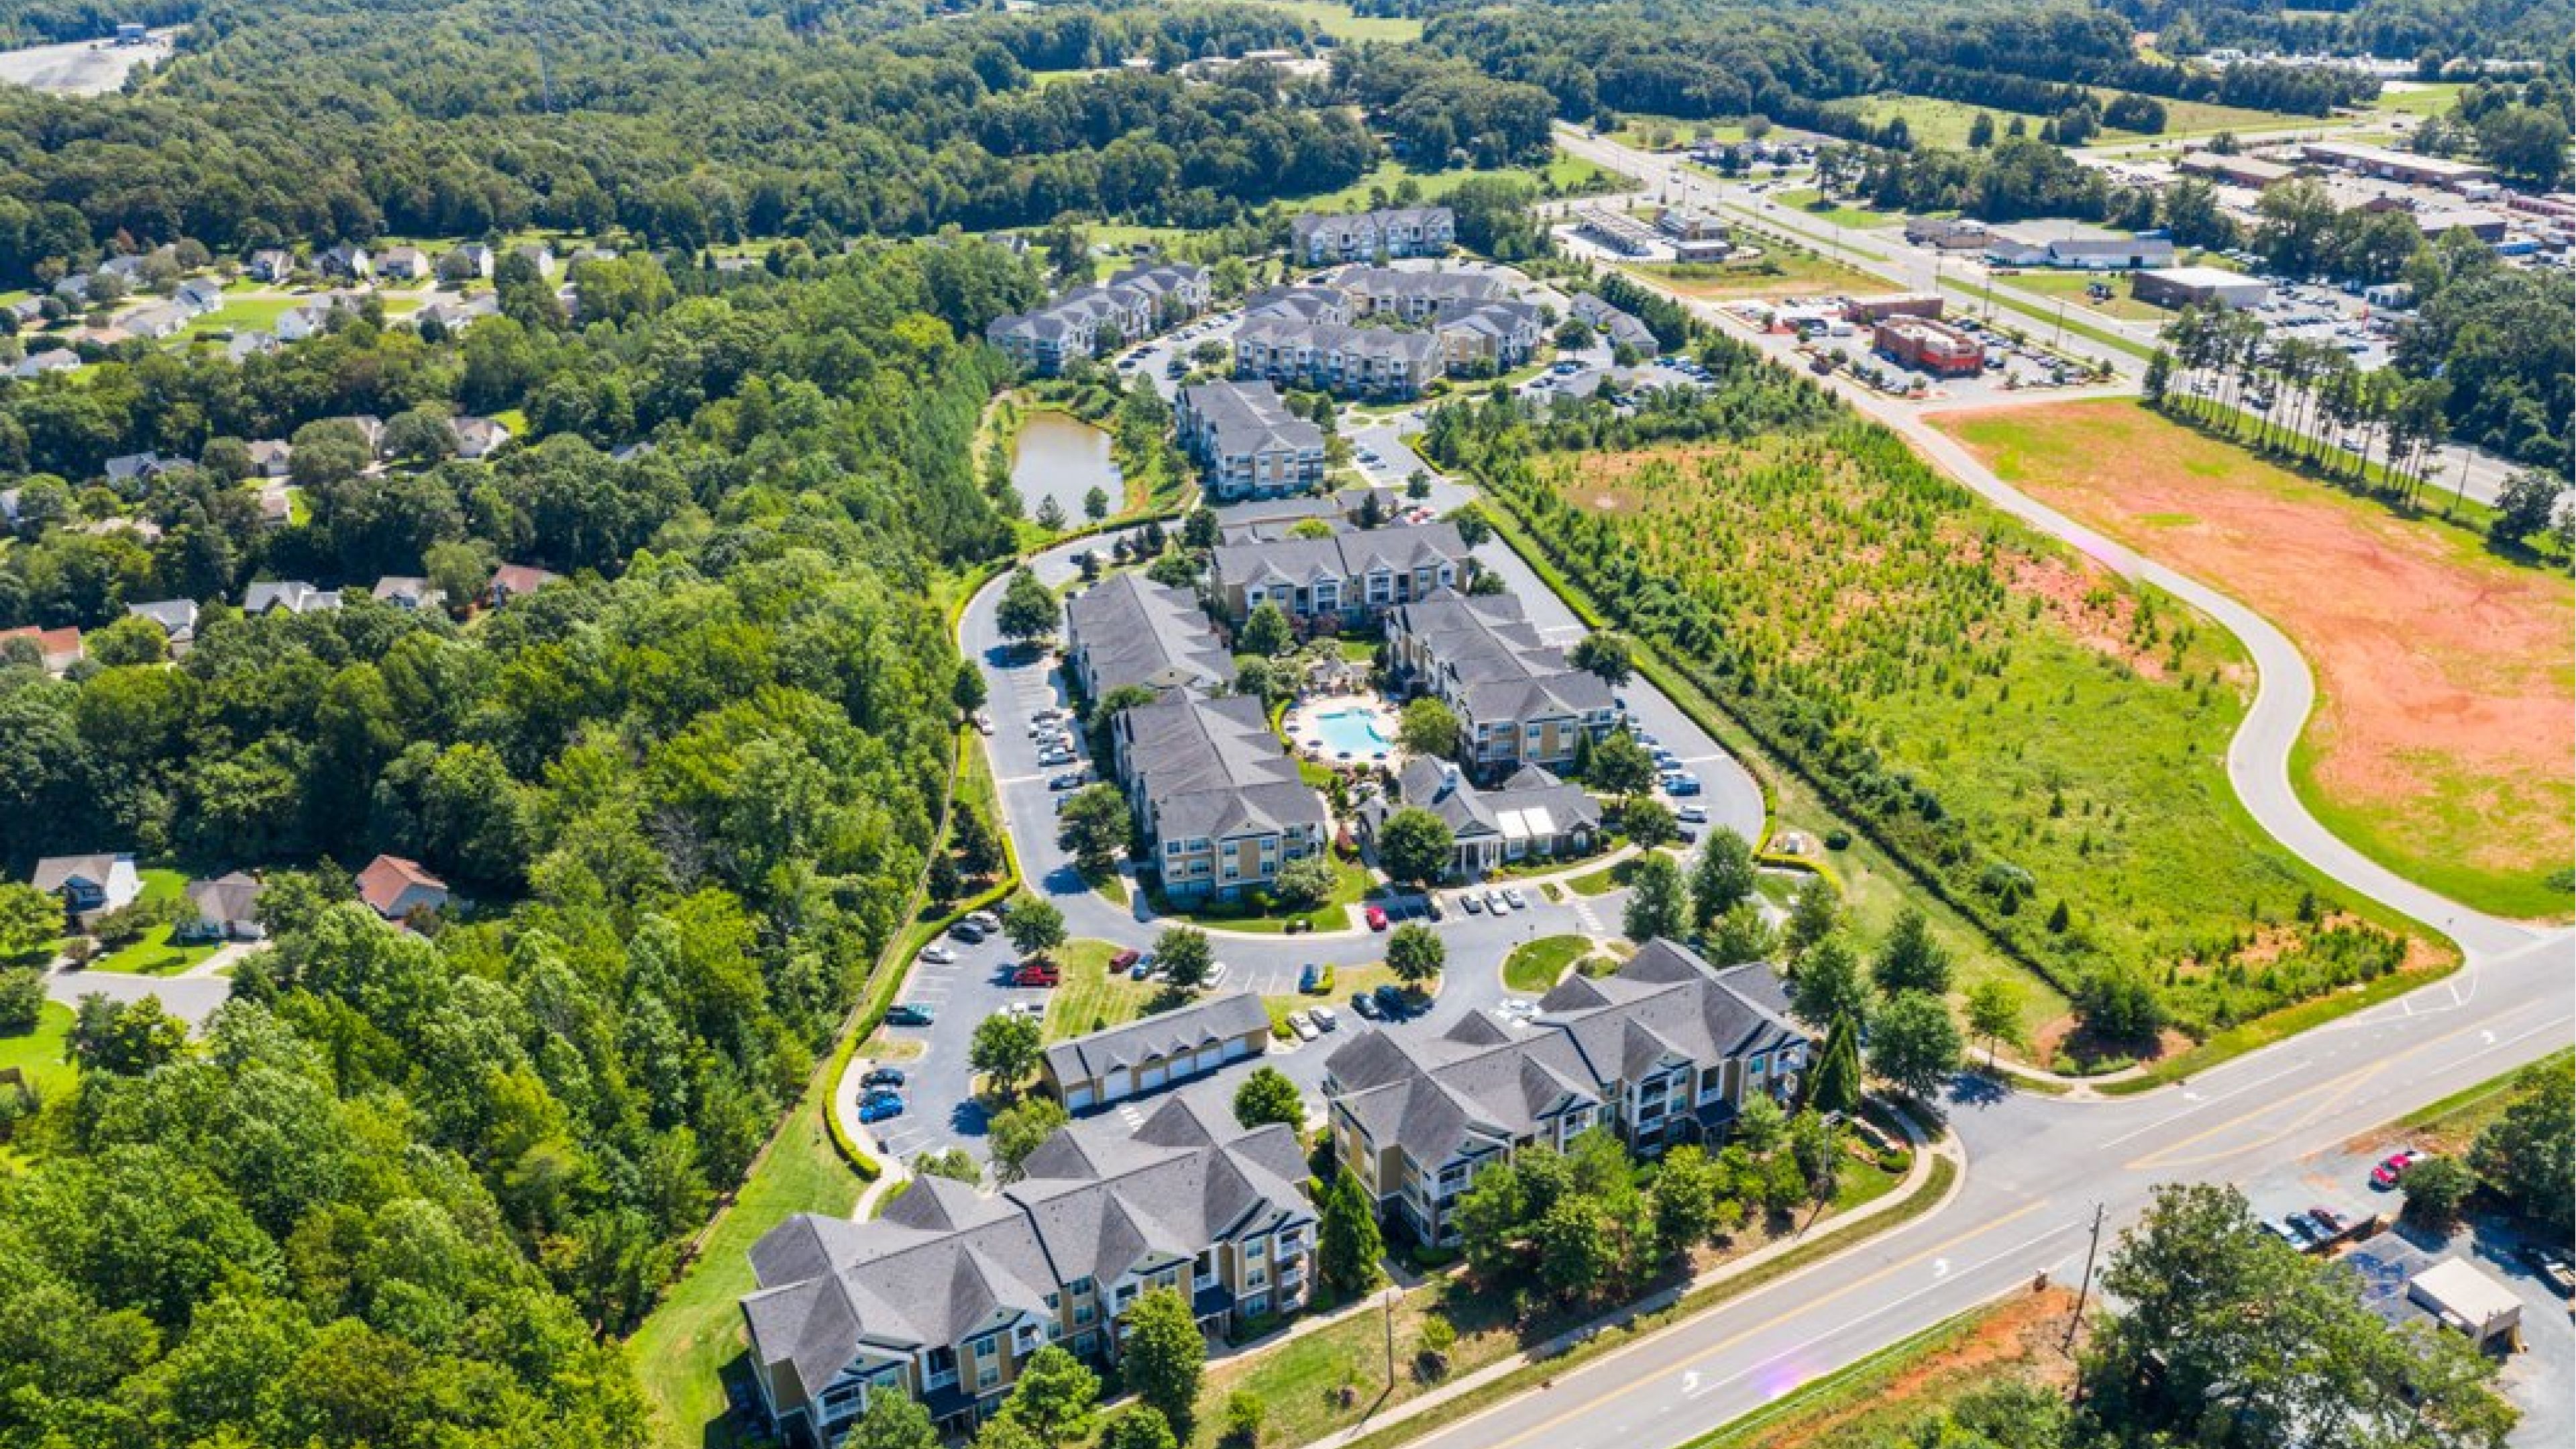 Hawthorne at the Greene beautiful aerial view of apartment community buildings, outdoor pool, and outdoor amenities, surrounded by green land and trees